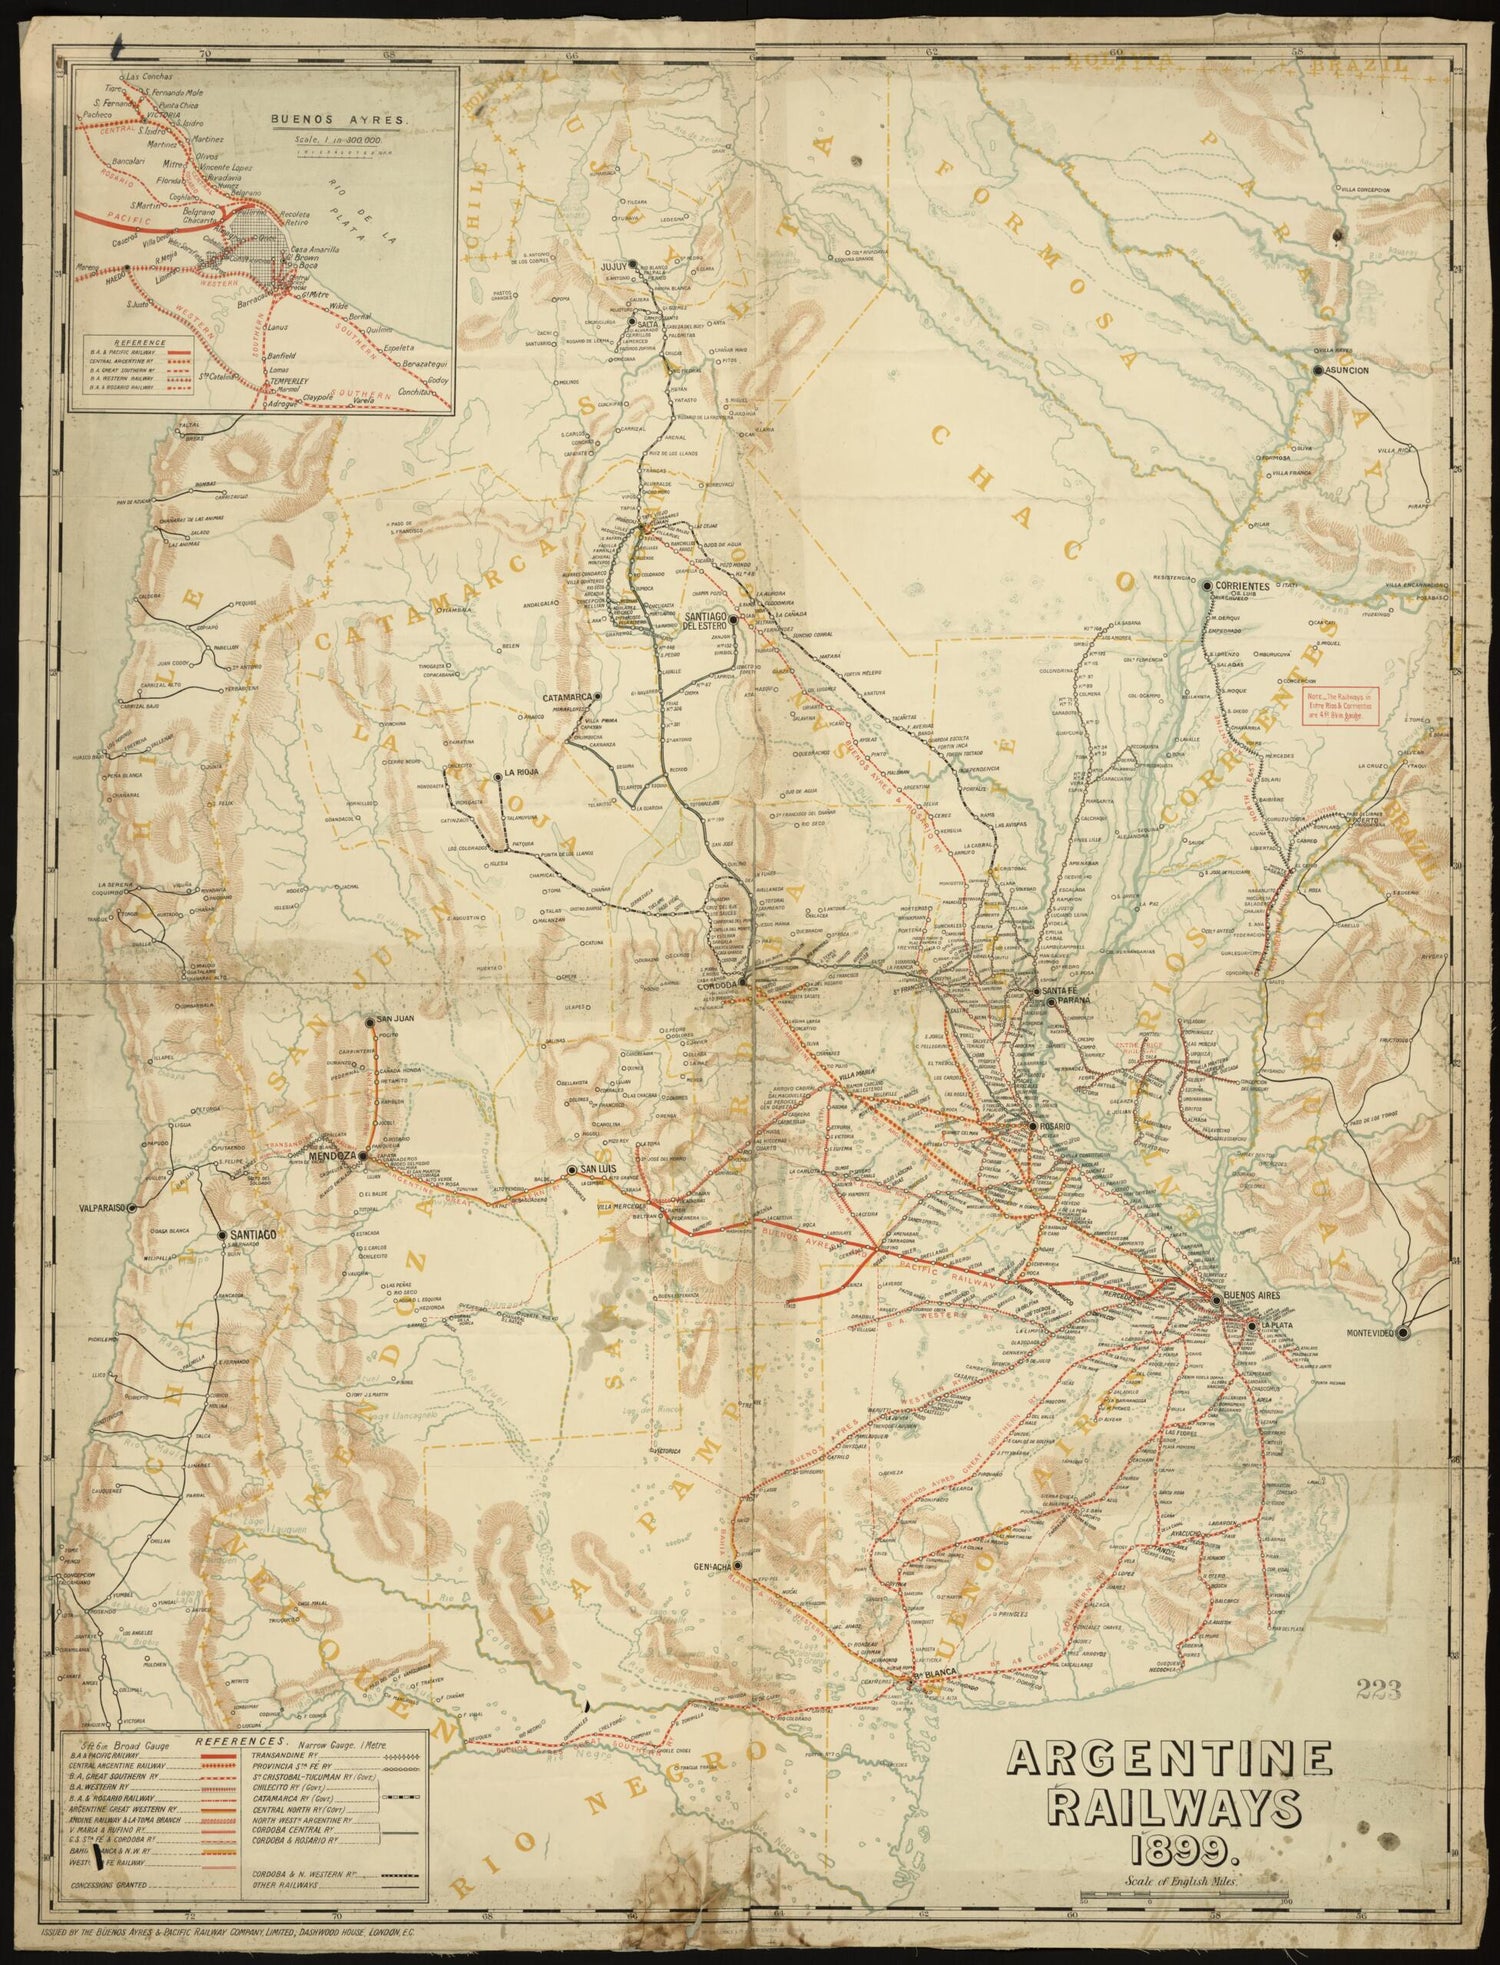 This old map of Argentine Railways, from 1899 was created by  Buenos Aires and Pacific Railway Company in 1899